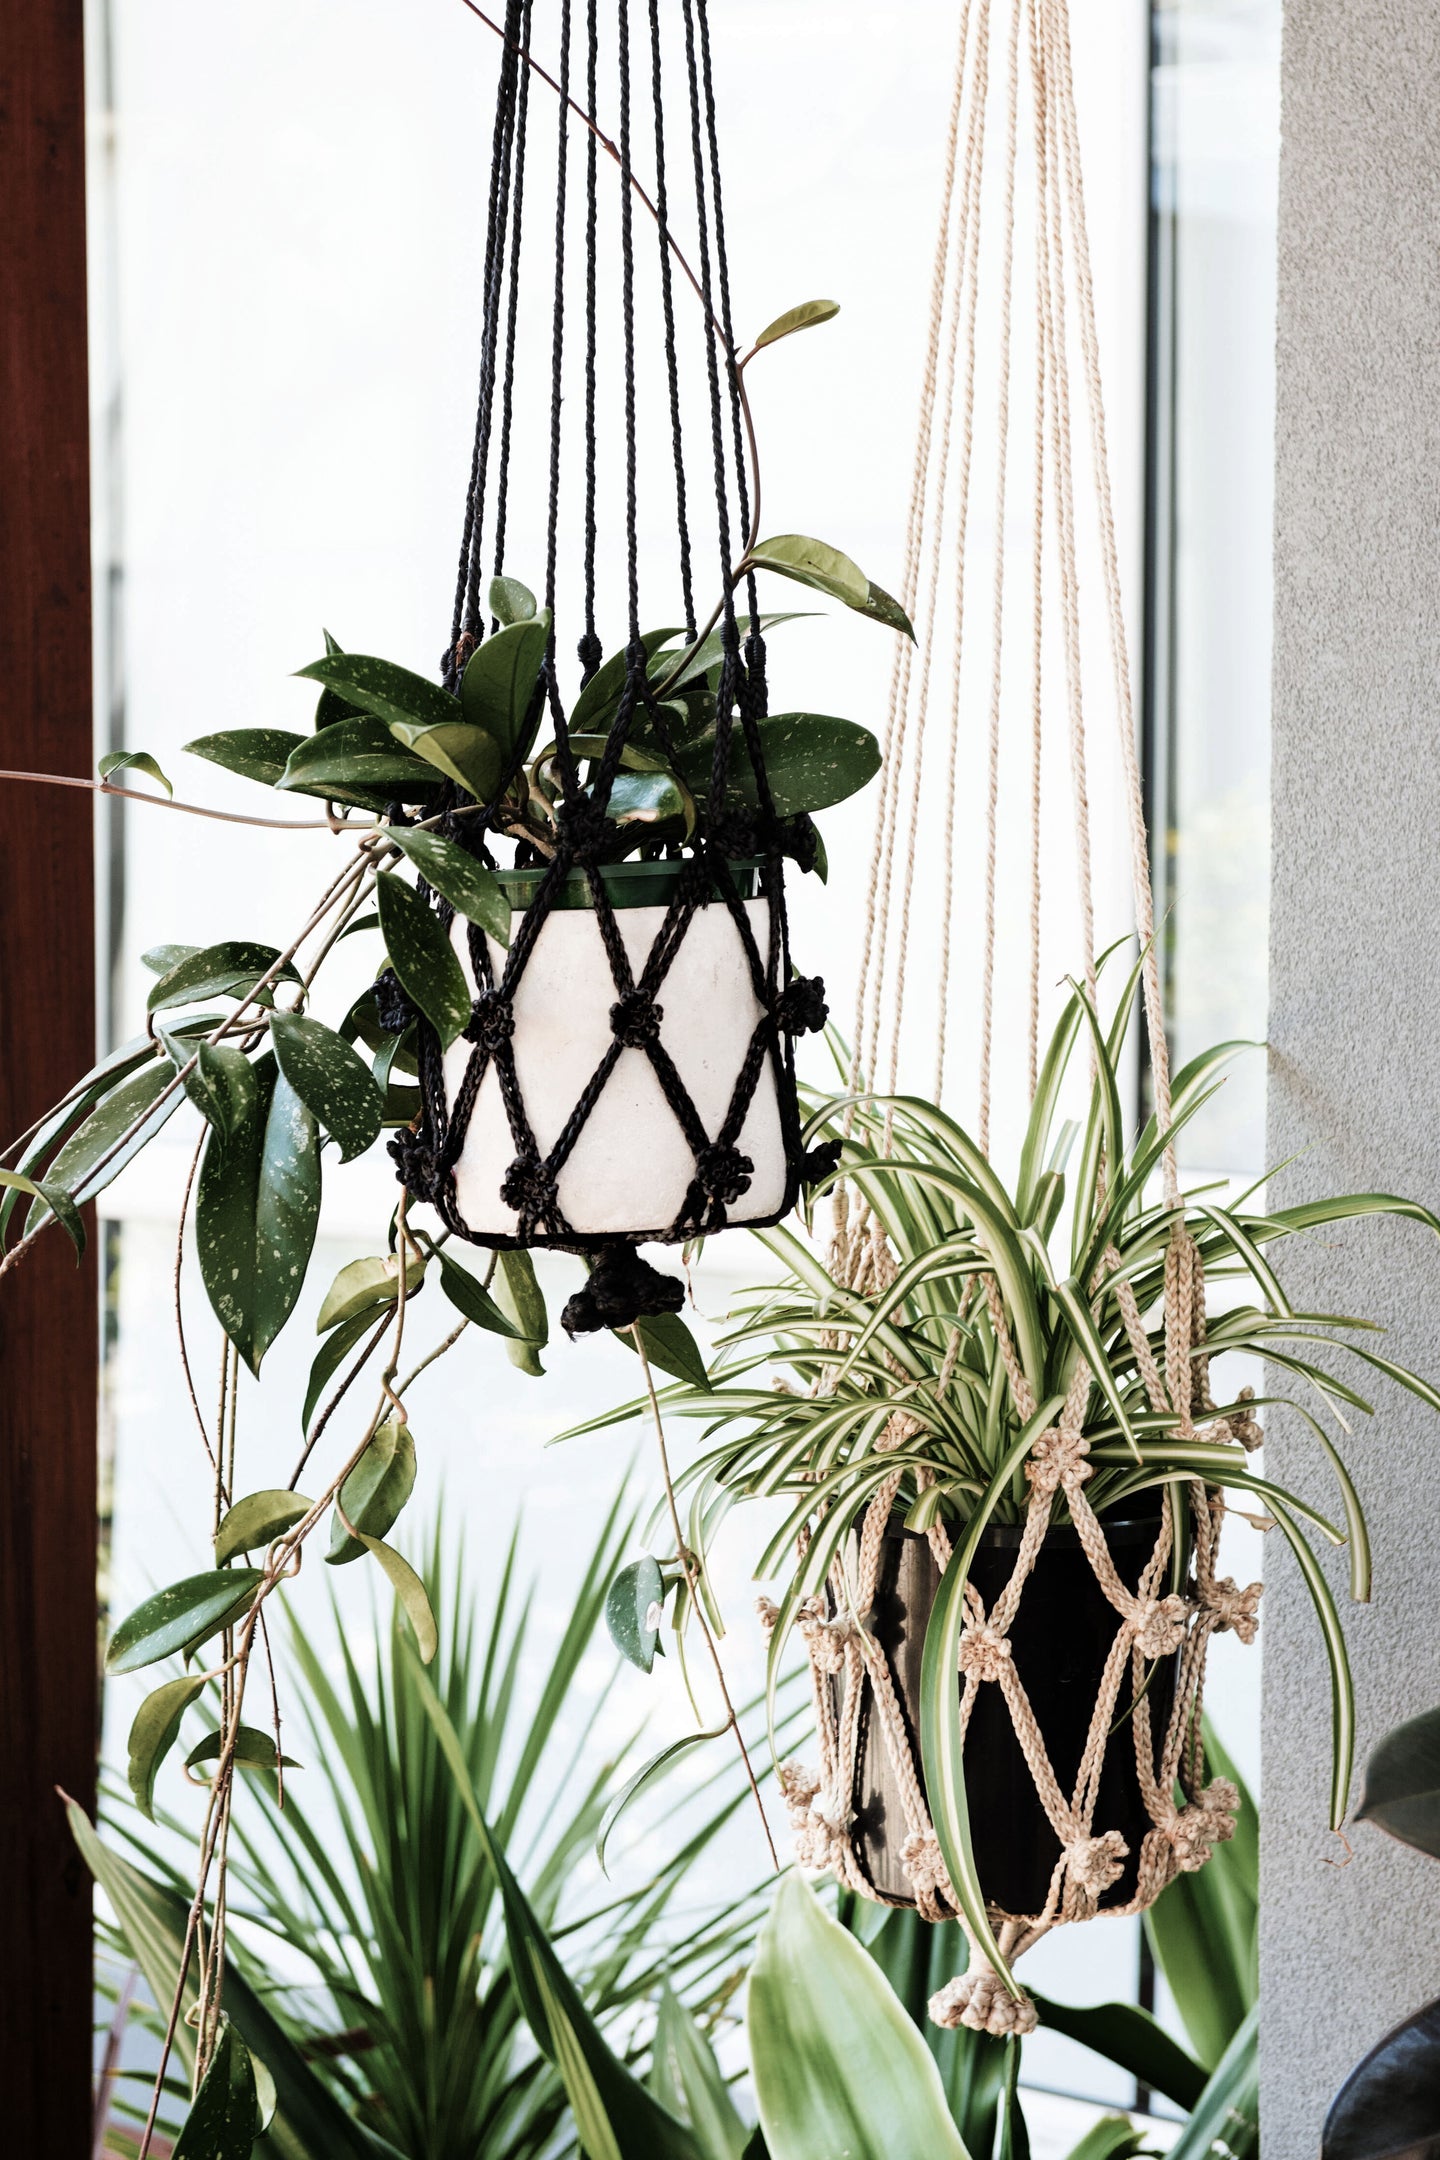 Our macrame plant hangers are designed to display your indoor plants with unique flair. flower plant hanger. jute plant hanger. macrame plant hanger. hanging plants. black plant hanger.